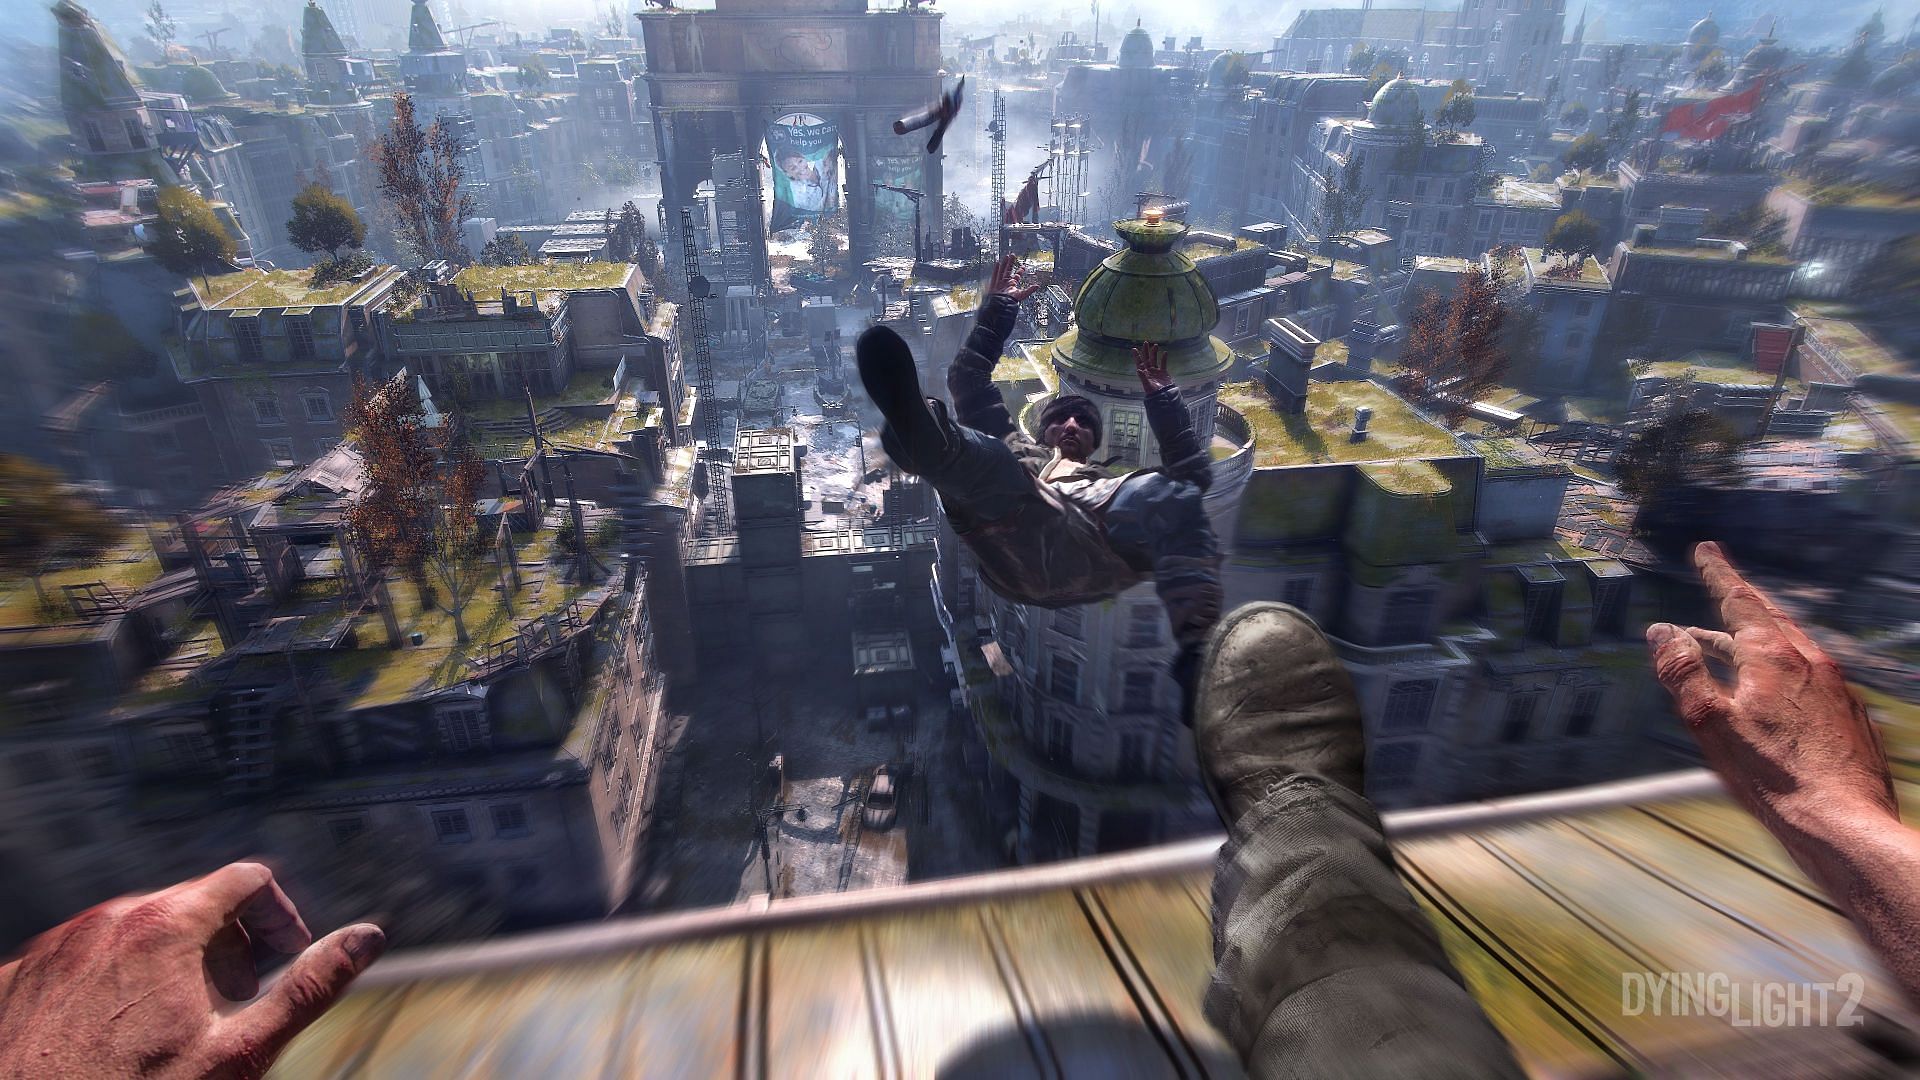 Dying Light 2 drops February 4th, 2022. Image via Techland